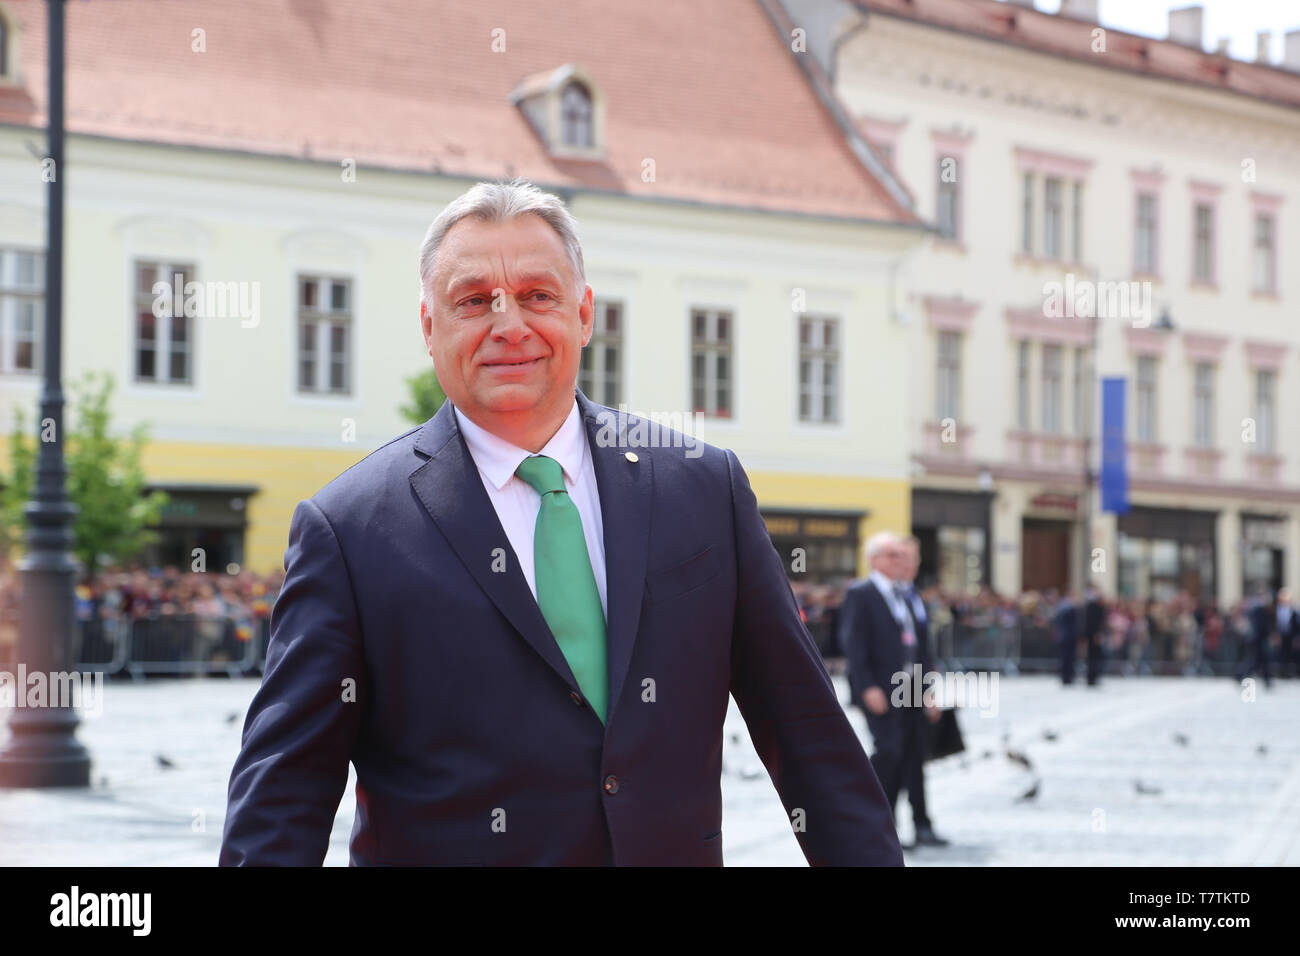 Sibiu, Romania. 9th May, 2019. Hungarian Prime Minister Viktor Orban arrives in the Grand Square in front of the Sibiu City Hall to attend the European Union (EU) informal summit in Sibiu, Romania, May 9, 2019. The leaders of the EU member states on Thursday agreed on defending 'one Europe' and upholding the rules-based international order in their '10 commitments' declaration, made at an informal summit in Sibiu. Credit: Chen Jin/Xinhua/Alamy Live News Stock Photo